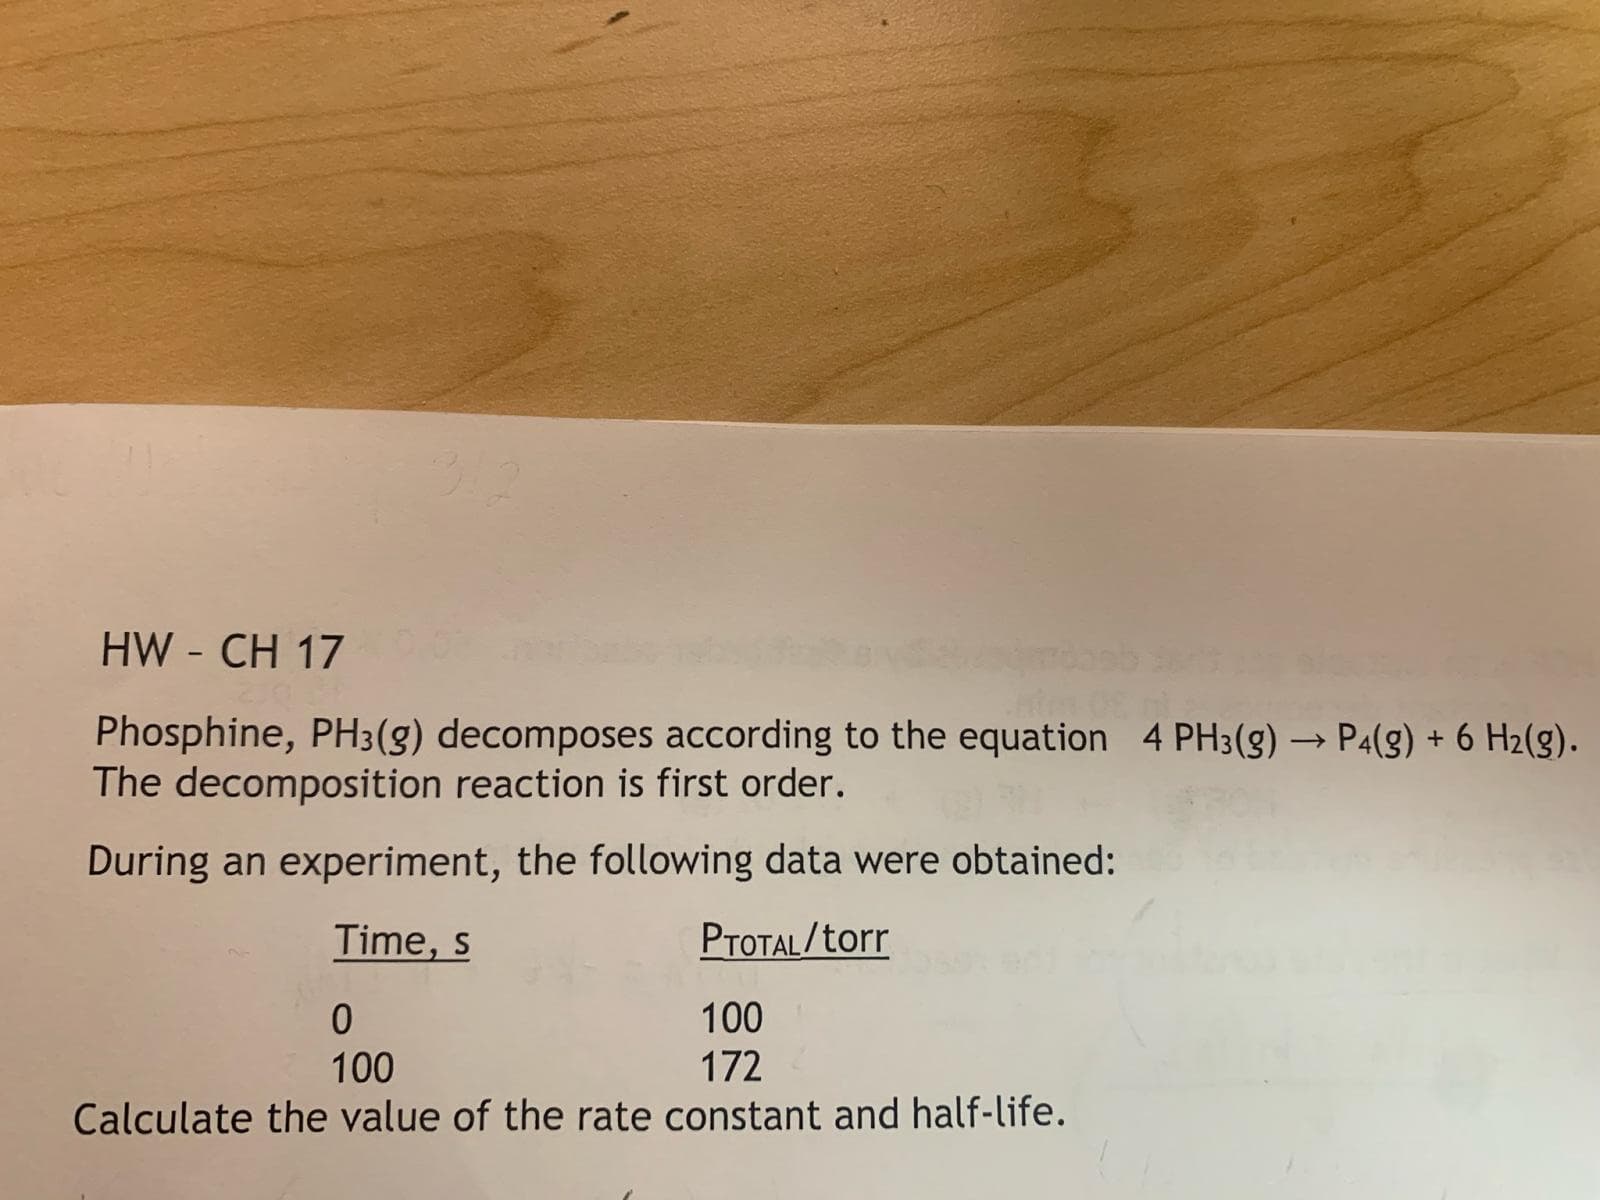 HW - CH 17
Phosphine, PH3(g) decomposes according to the equation 4 PH3(g) → P4(g) + 6 H2(g).
The decomposition reaction is first order.
During an experiment, the following data were obtained:
Time, s
PTOTAL/torr
100
172
100
Calculate the value of the rate constant and half-life.
